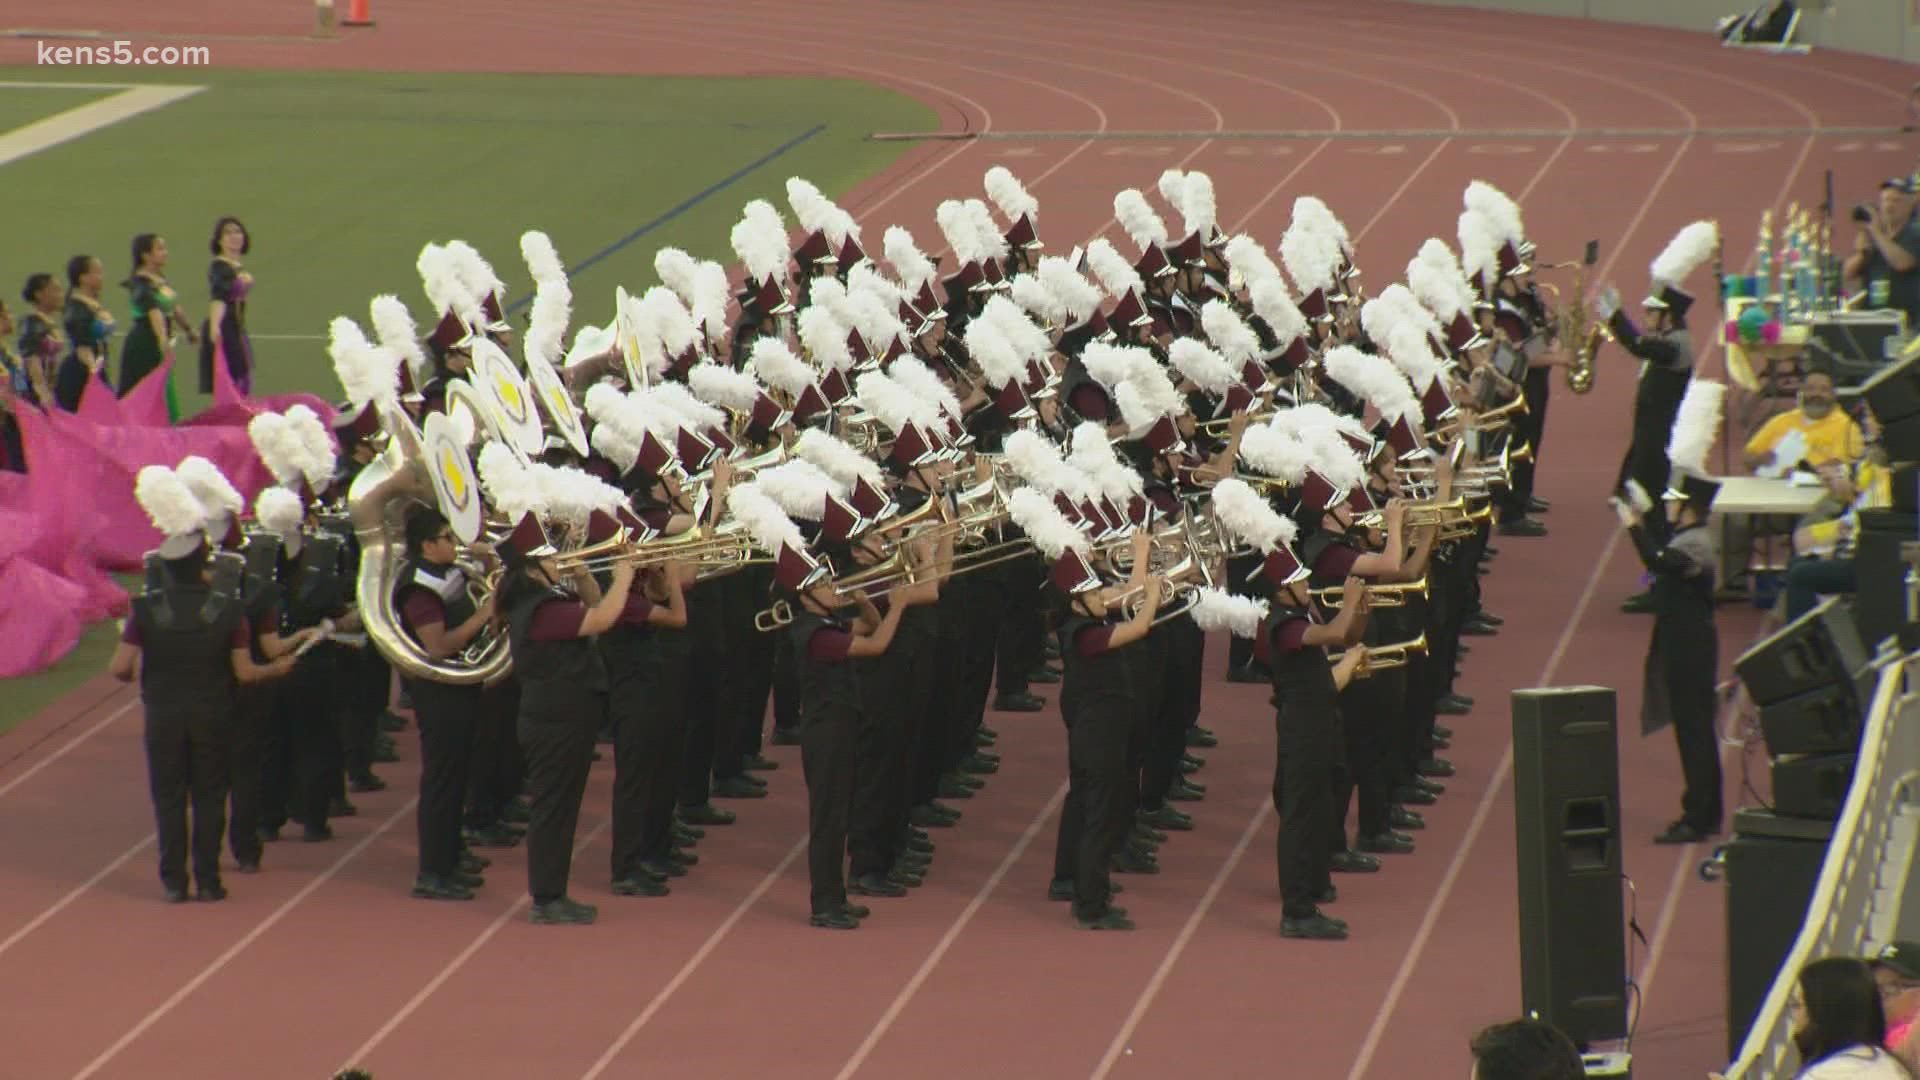 Students from more than 30 local high school bands put on an evening of music.